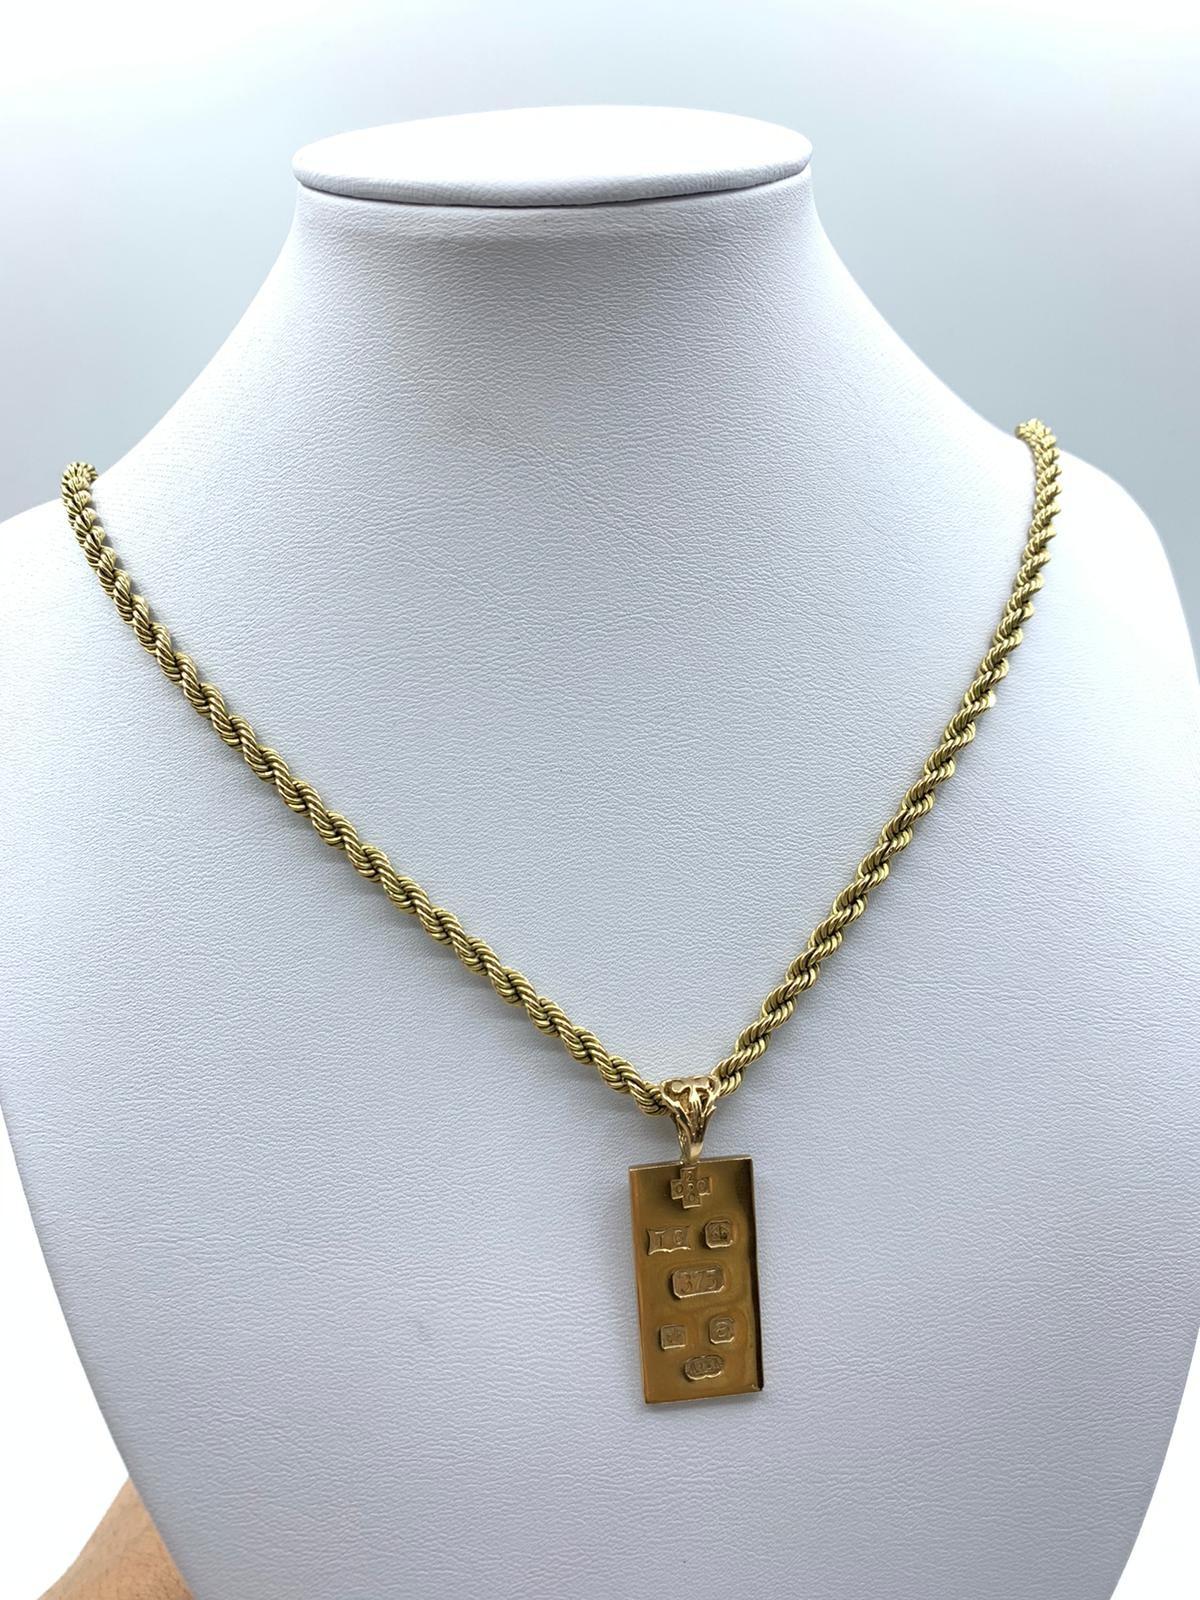 9ct yellow gold ingot pendant with full hallmark on the back, set in 9ct gold chain 70cm long, total